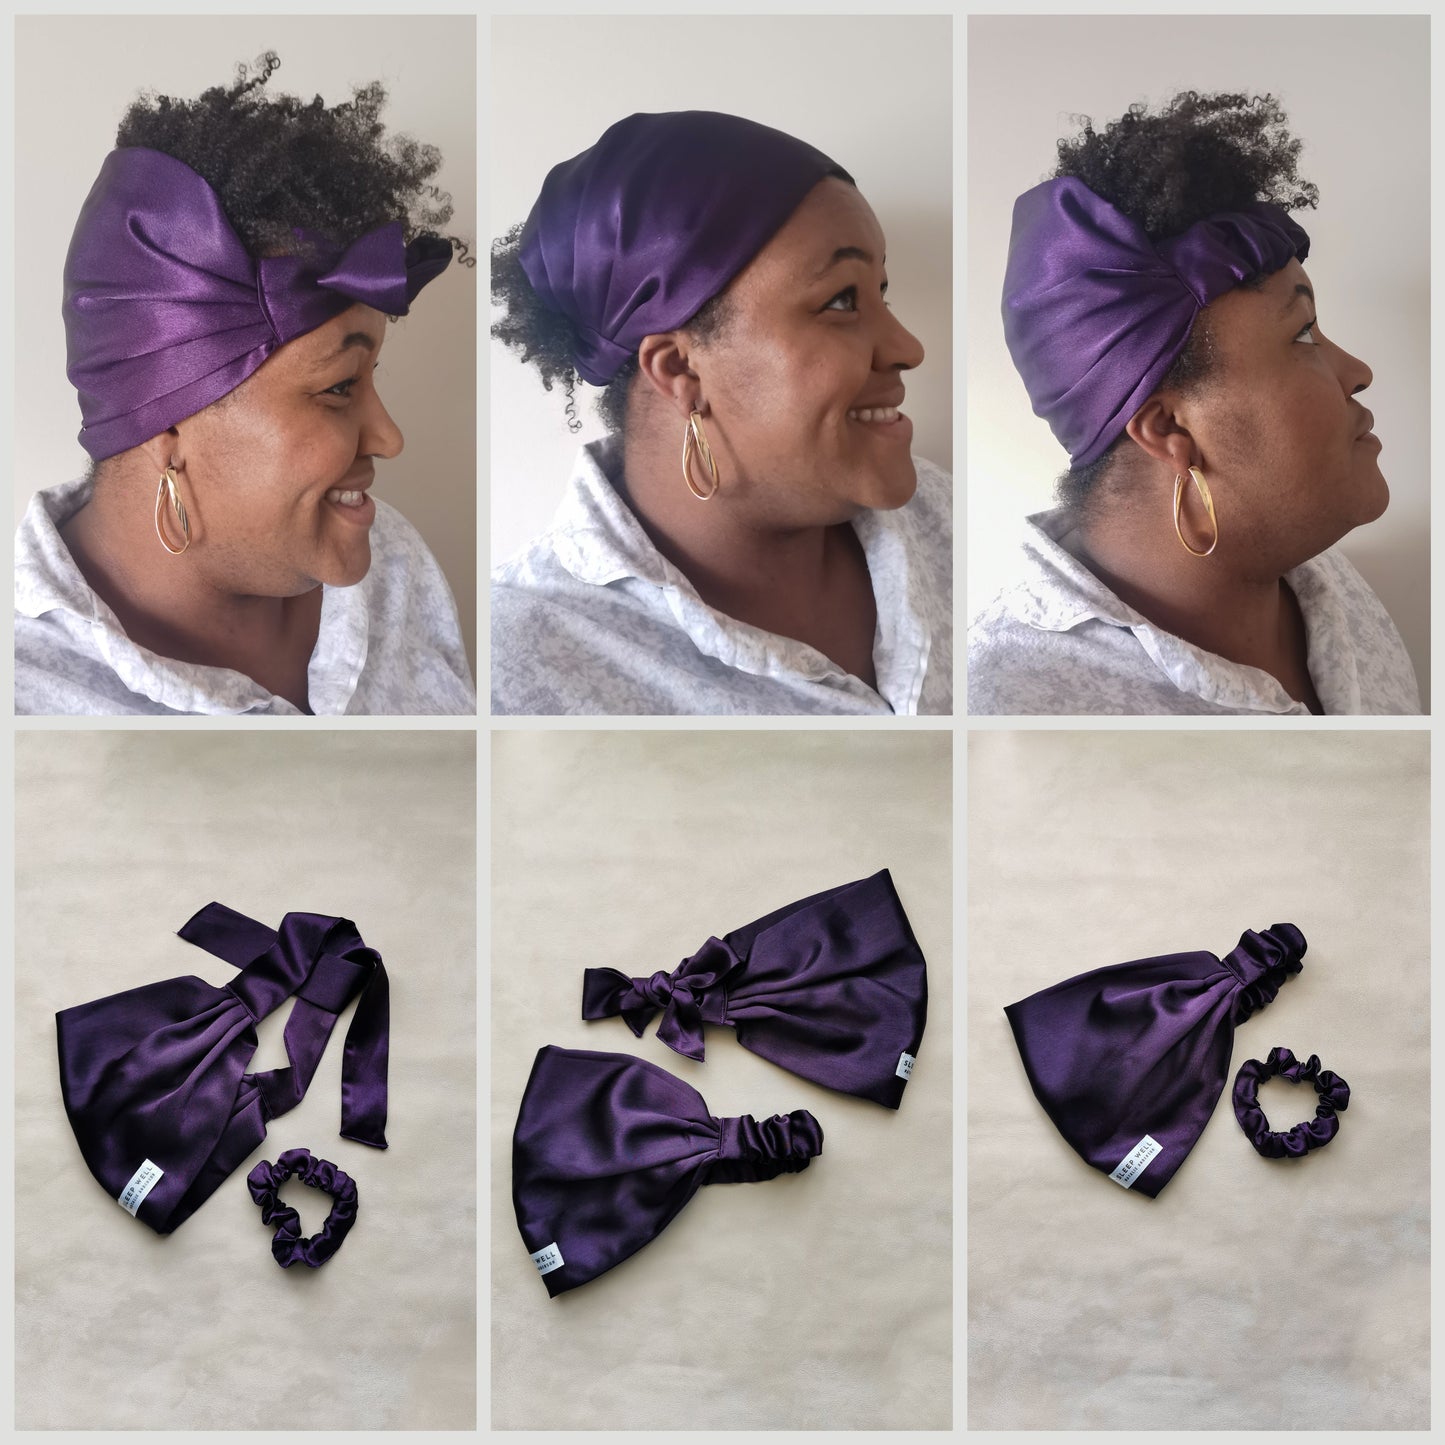 SLEEP WELL Natalie Anderson elastic and tie close pineapple protector satin hair wrap with coordinating midi scrunchie - model view